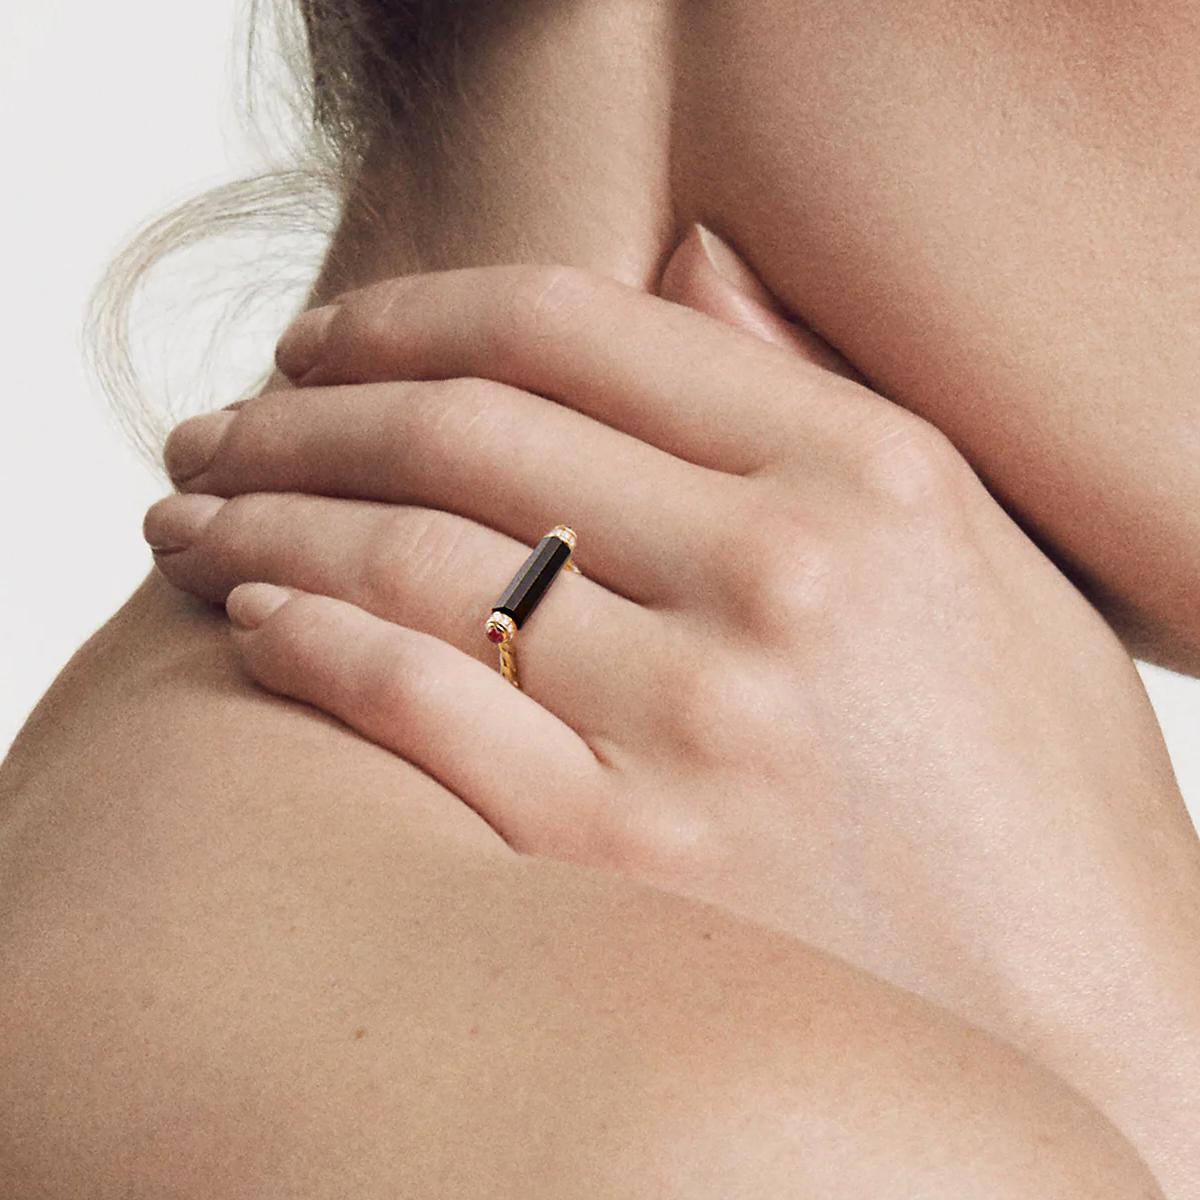 The prismatic beauty of crystalline structure inspired the Barrels Collection. Gemstones are cut to reflect light, revealing their inner radiance. This brand new ladies ring by David Yurman has a braided band with a black onyx bar crafted in 18k